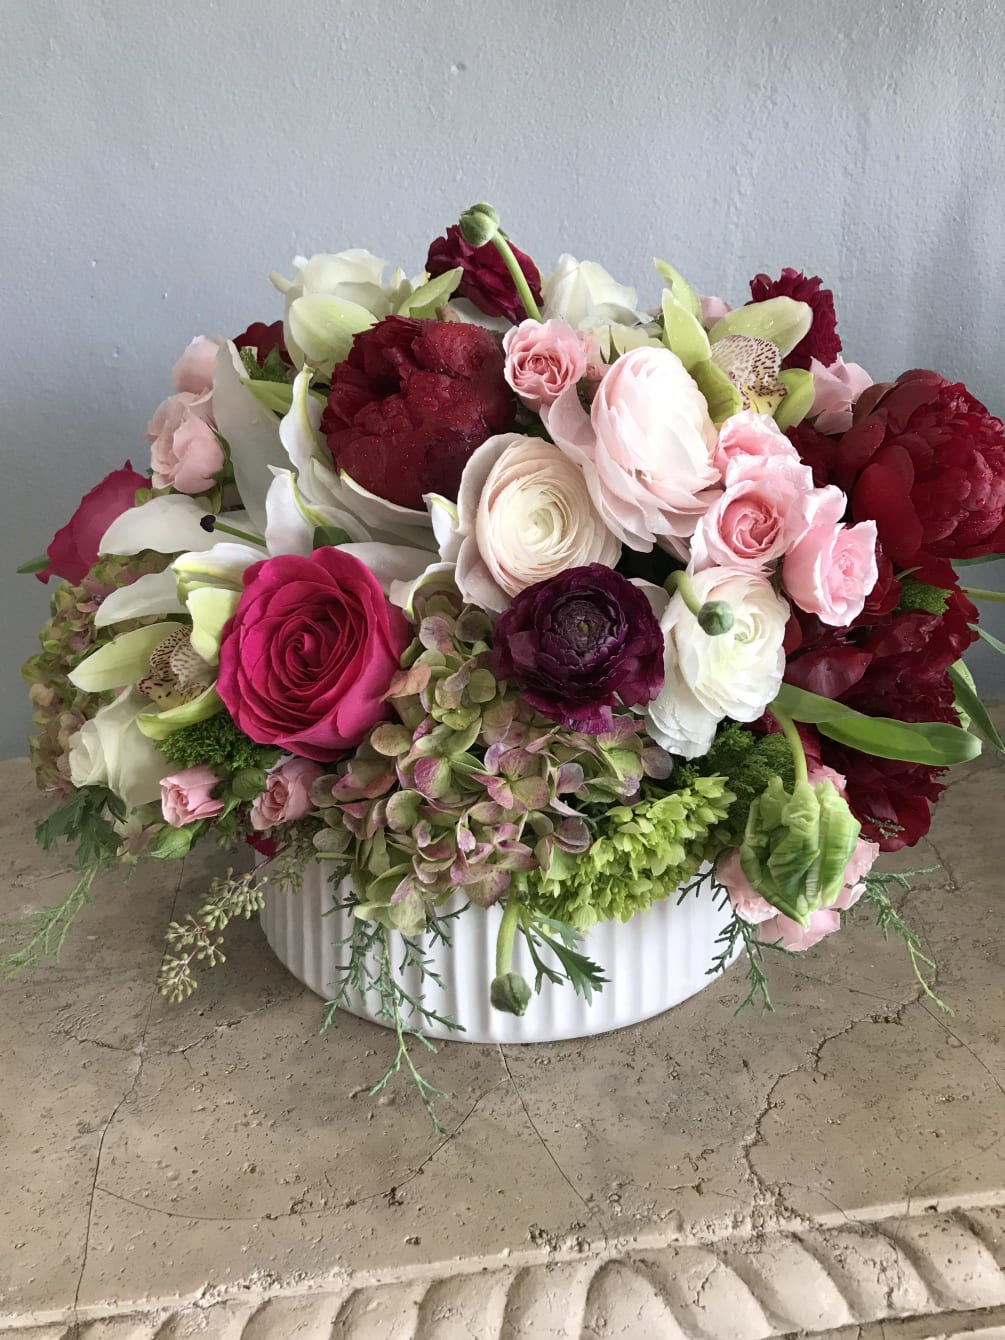 Sumptuous luxurious blooms of peonies, ranunculus, tulips and so much more in